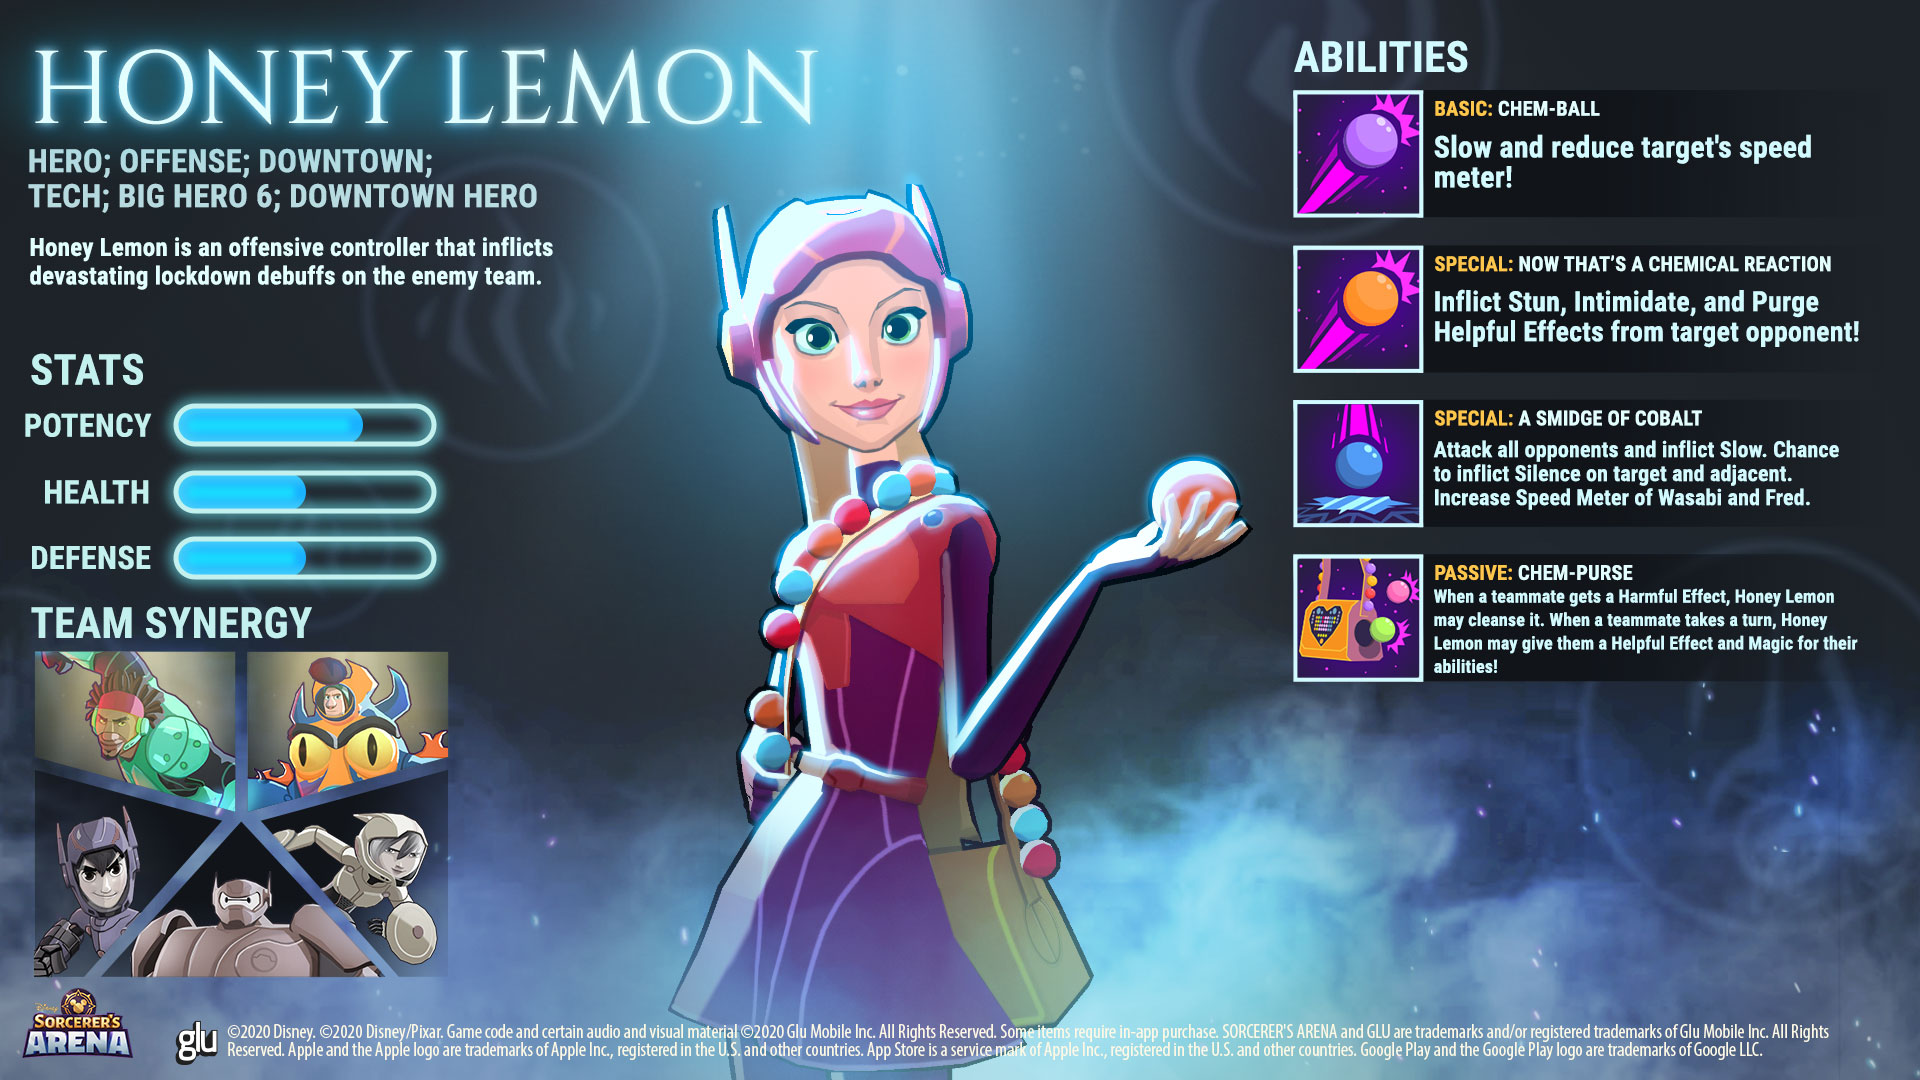 Disney Sorcerer's Arena on X: Honey Lemon and Fred work together to  inflict devastating lockdown debuffs on enemies! And once Fred is charged  up he can deal out continuous damage on the